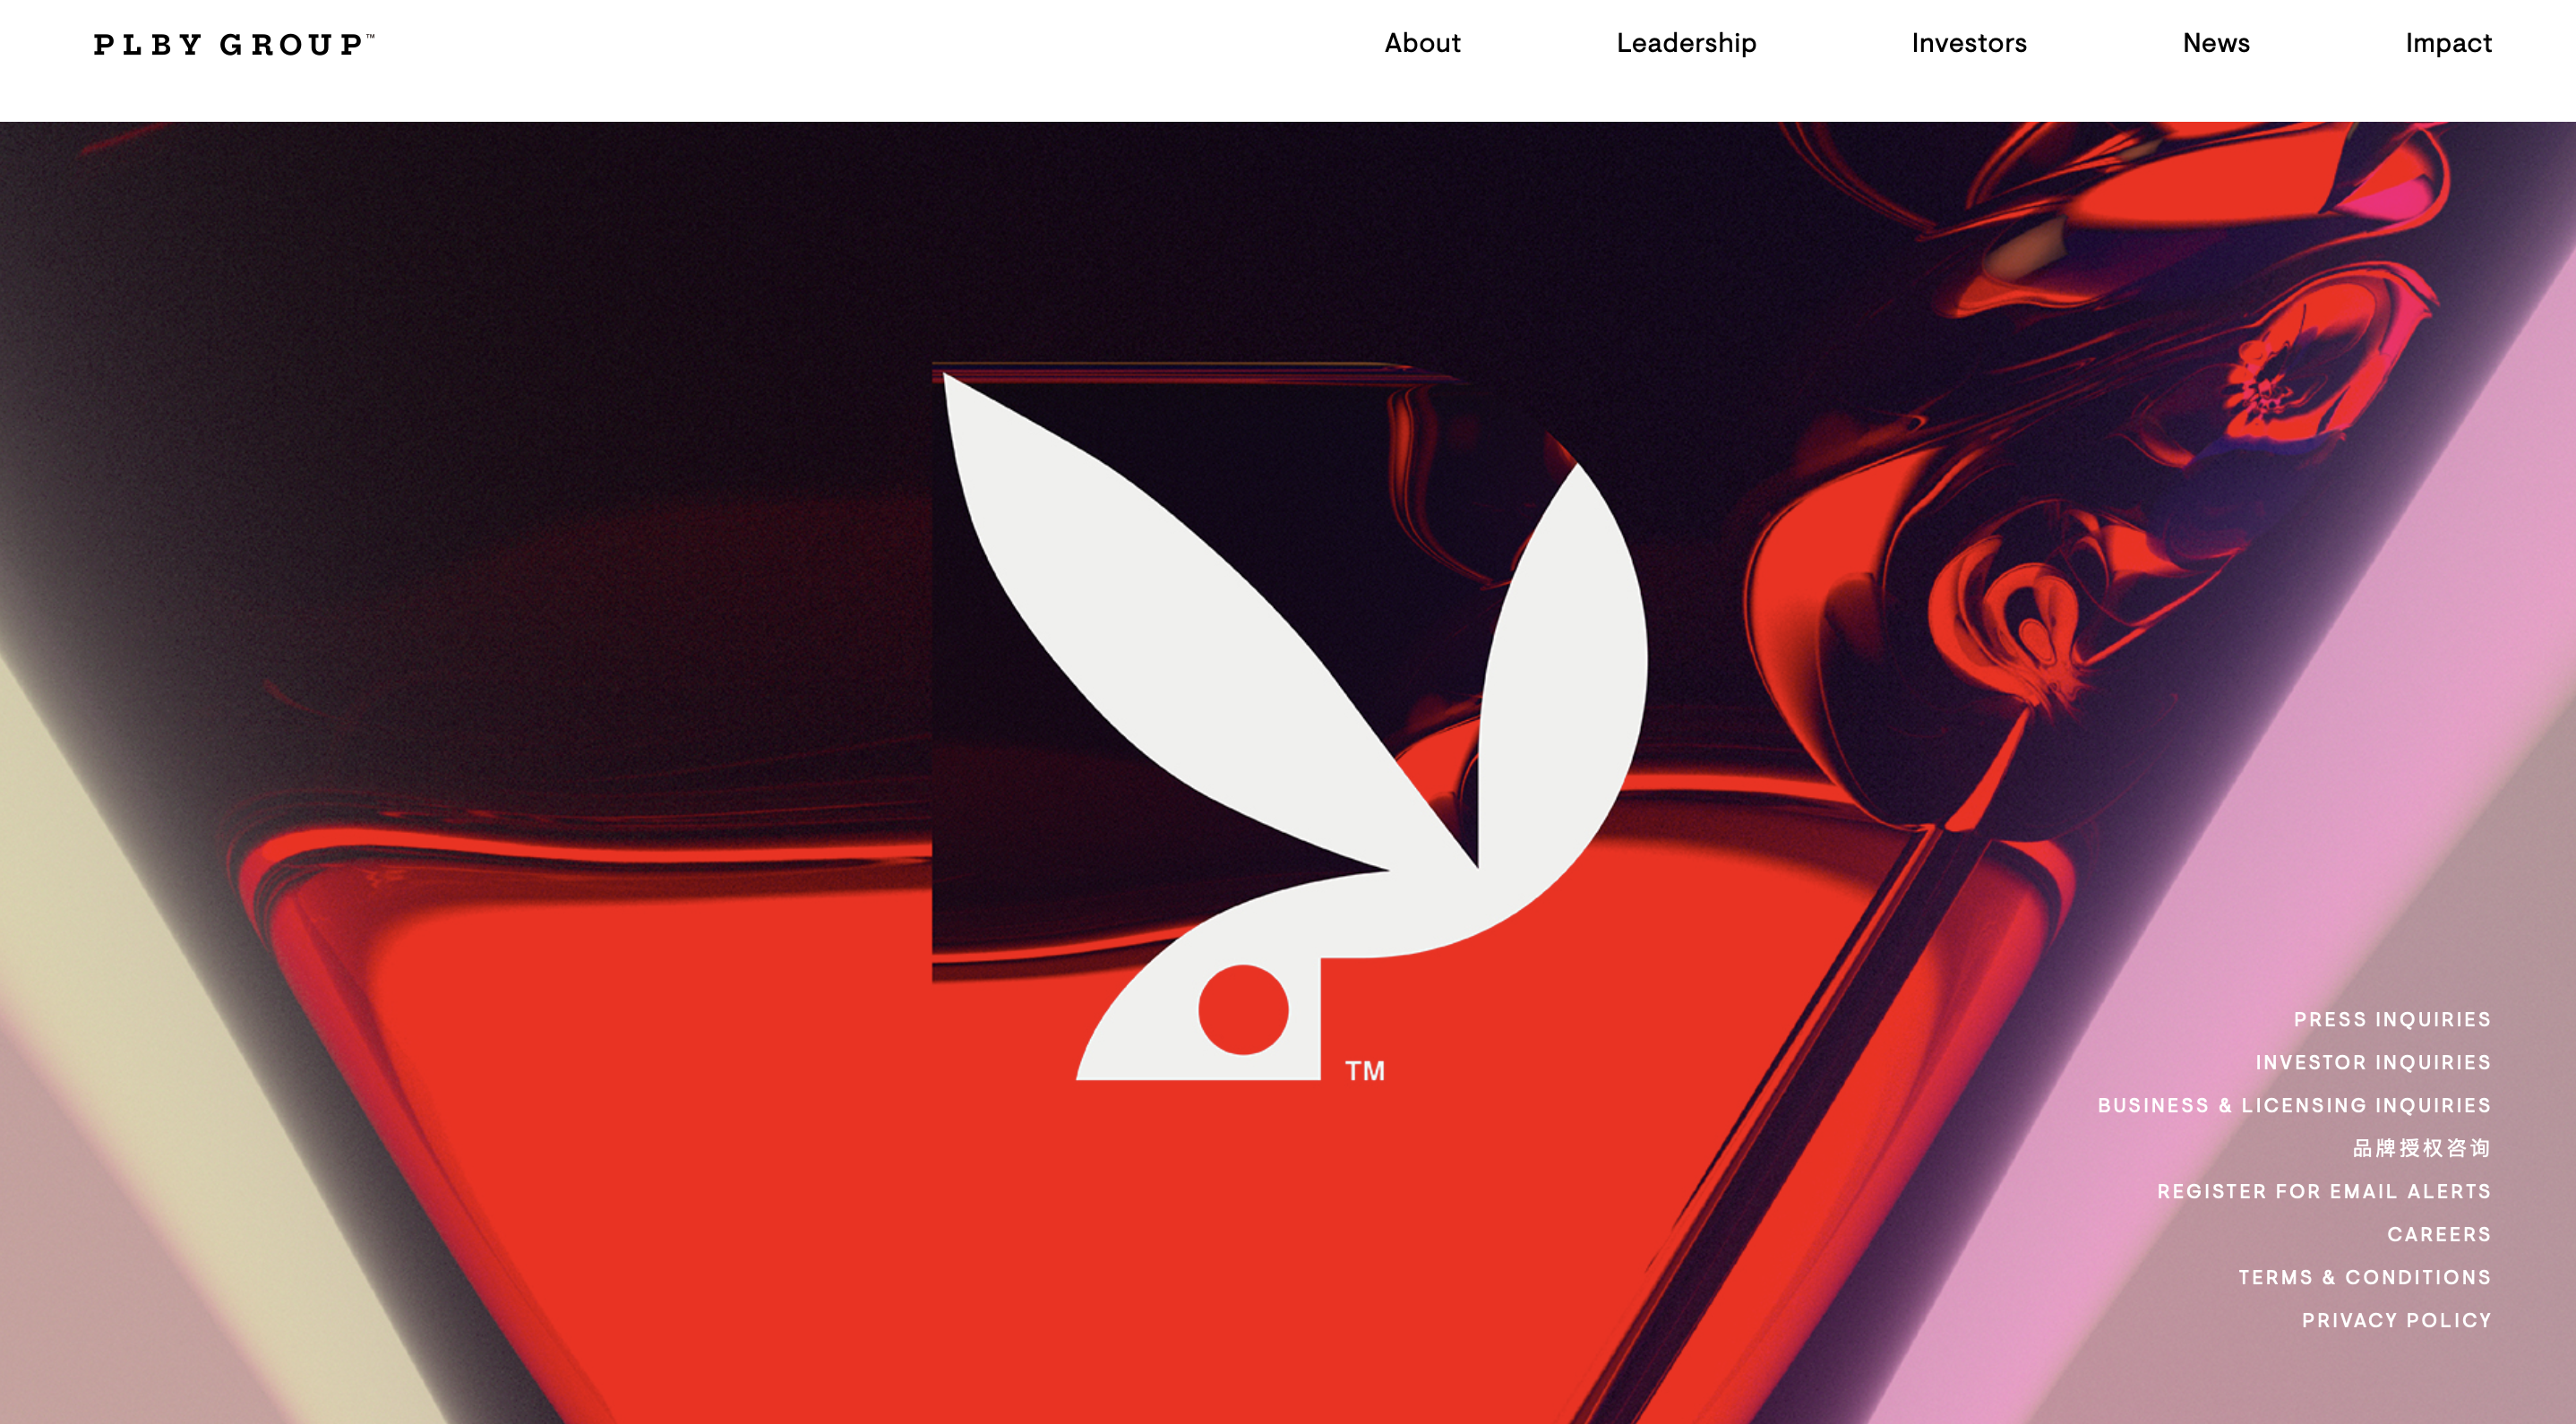 Playboy’s Parent Company and Fung Retailing Group Set Up a Joint Venture in China